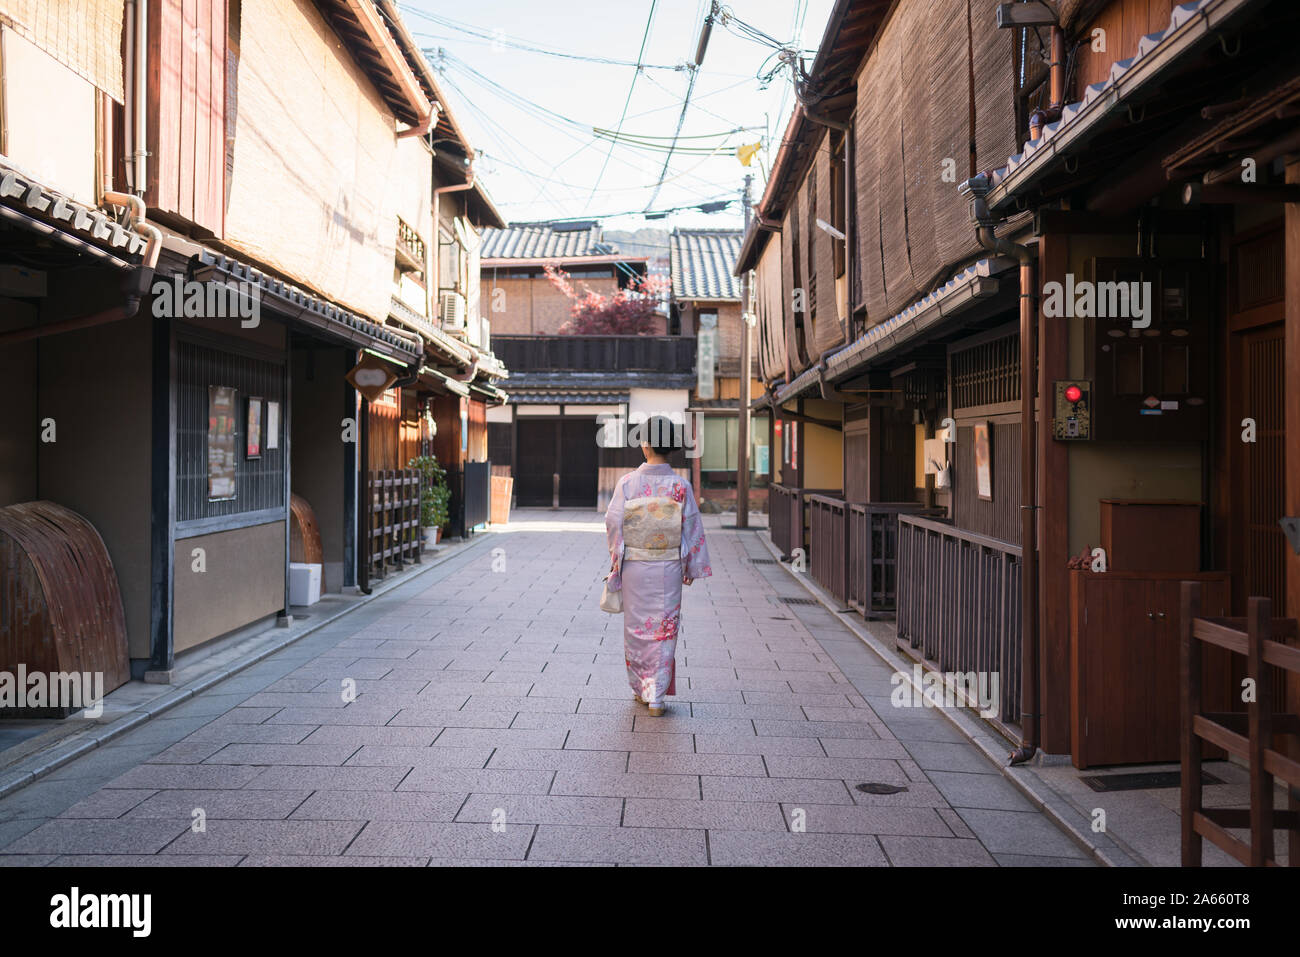 Young Asian Lady in Kimono walking in an empty Street in Higahiyama District, Gion, Kyoto, Japan Stock Photo